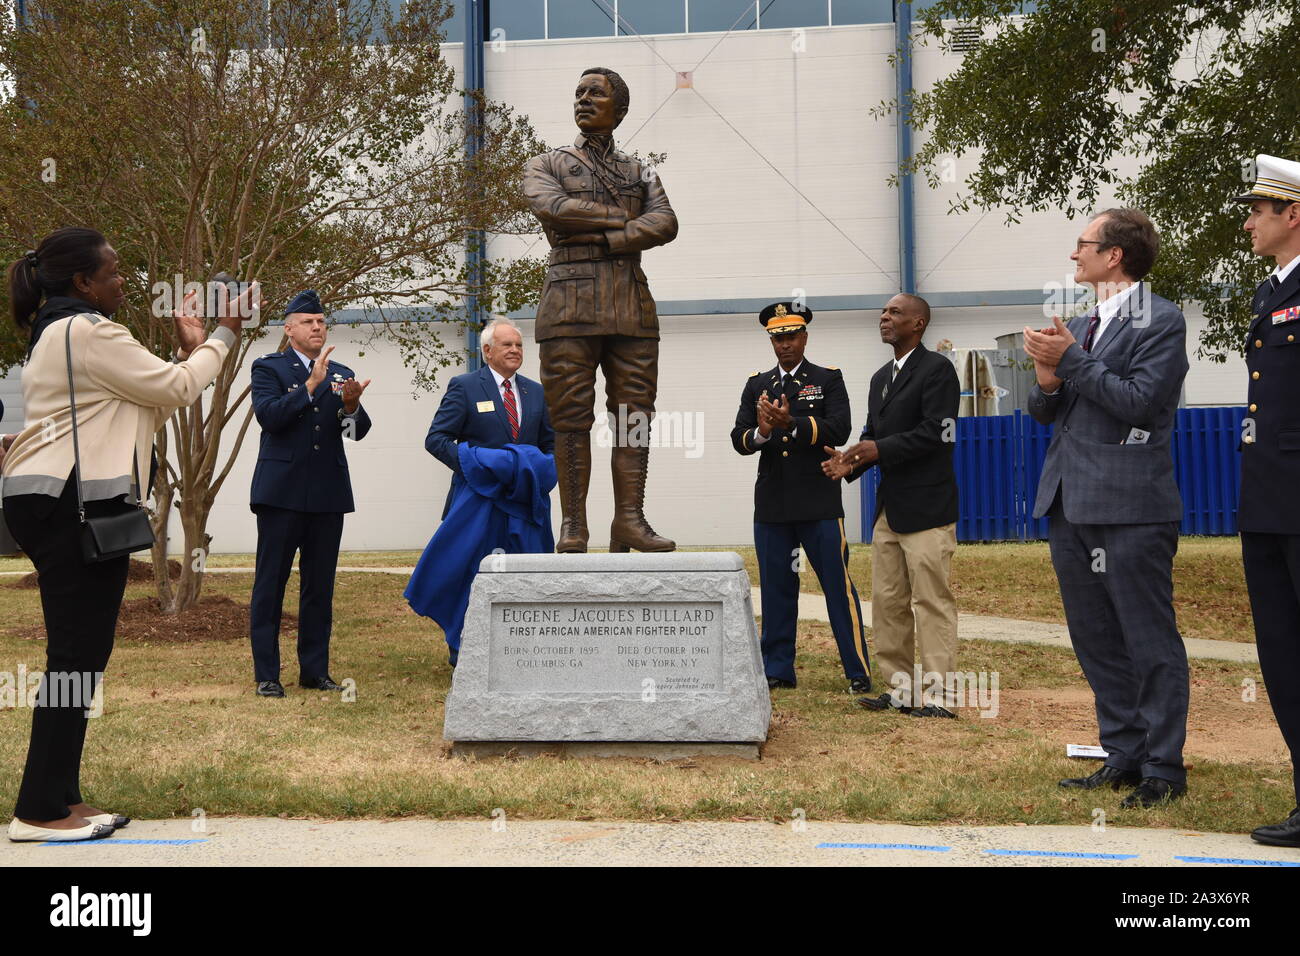 Warner Robins, United States. 09 October, 2019. Military officials and family members applaud as a statue of 2nd Lt. Eugene Jacques Bullard, the first African American fighter pilot, is unveiled during a ceremony at the Museum of Aviation on Warner Robins Air Force Base October 9, 2019 in Warner Robins, Georgia. The statue was donated to the United States Air Force by the Georgia World War I Centennial Commission.  Credit: Tommie Horton/Planetpix/Alamy Live News Stock Photo